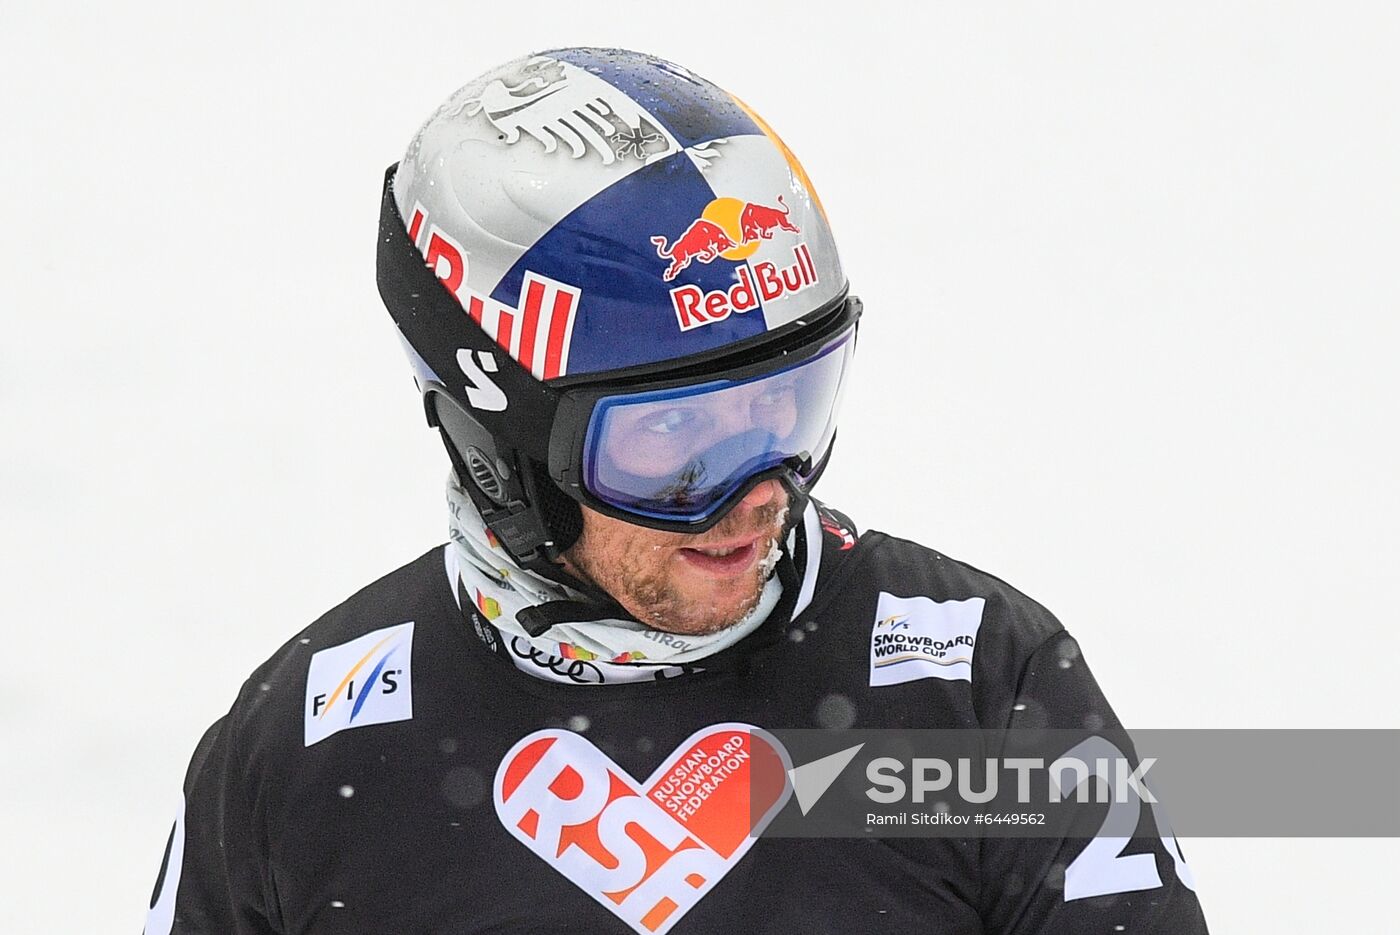 Russia Snowboard World Cup